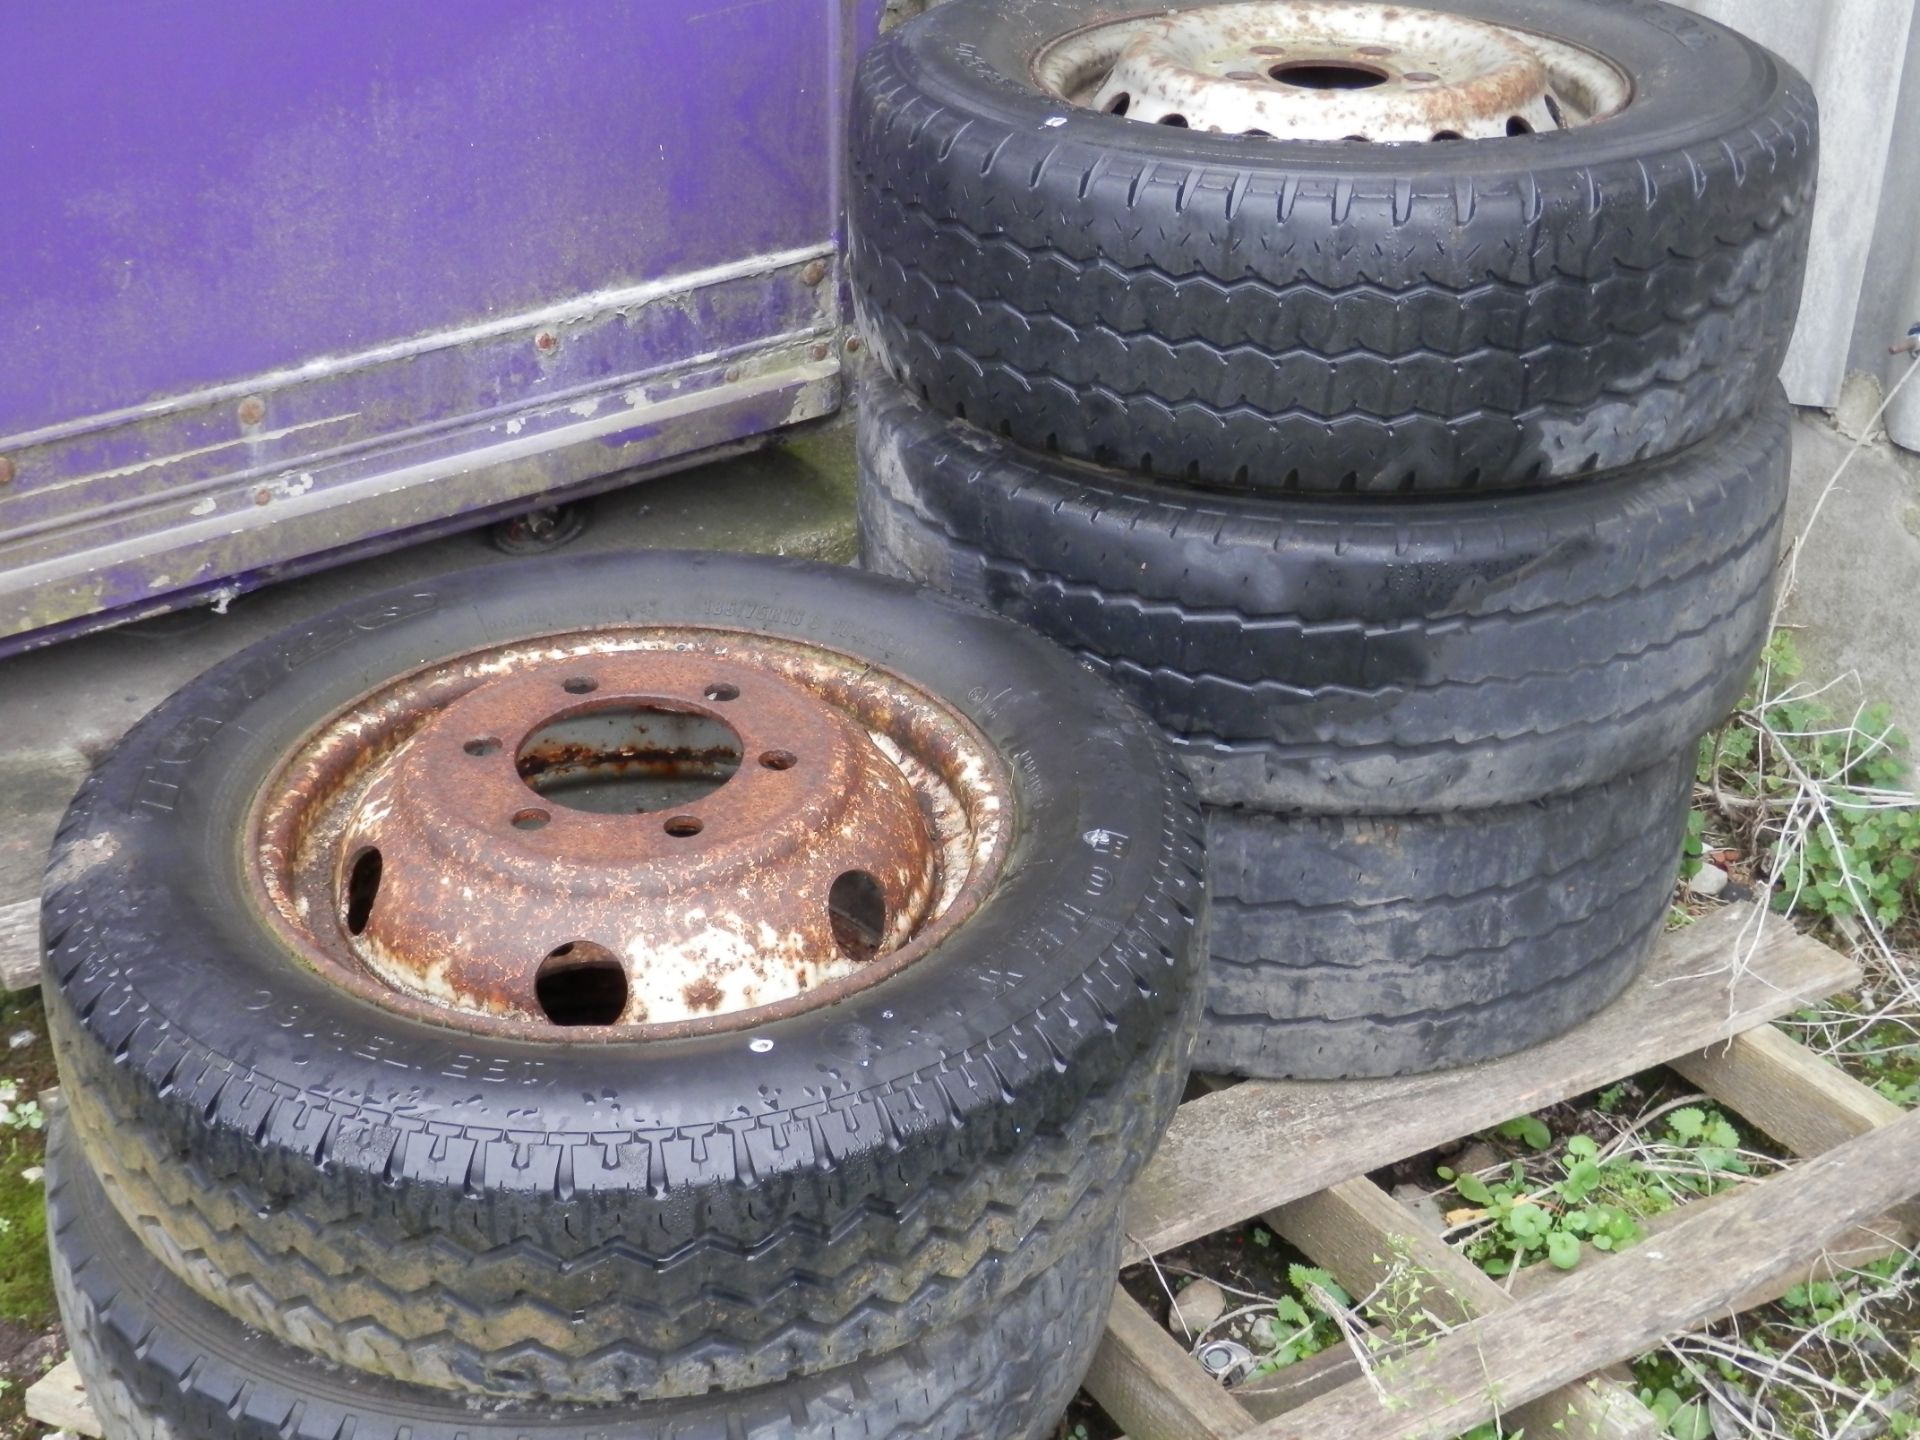 85 + ASSORTED LORRY, CAR & TRAILER TYRES & WHEELS, AS PICTURED. BUYER TO COLLECT COMPLETE - Image 7 of 10